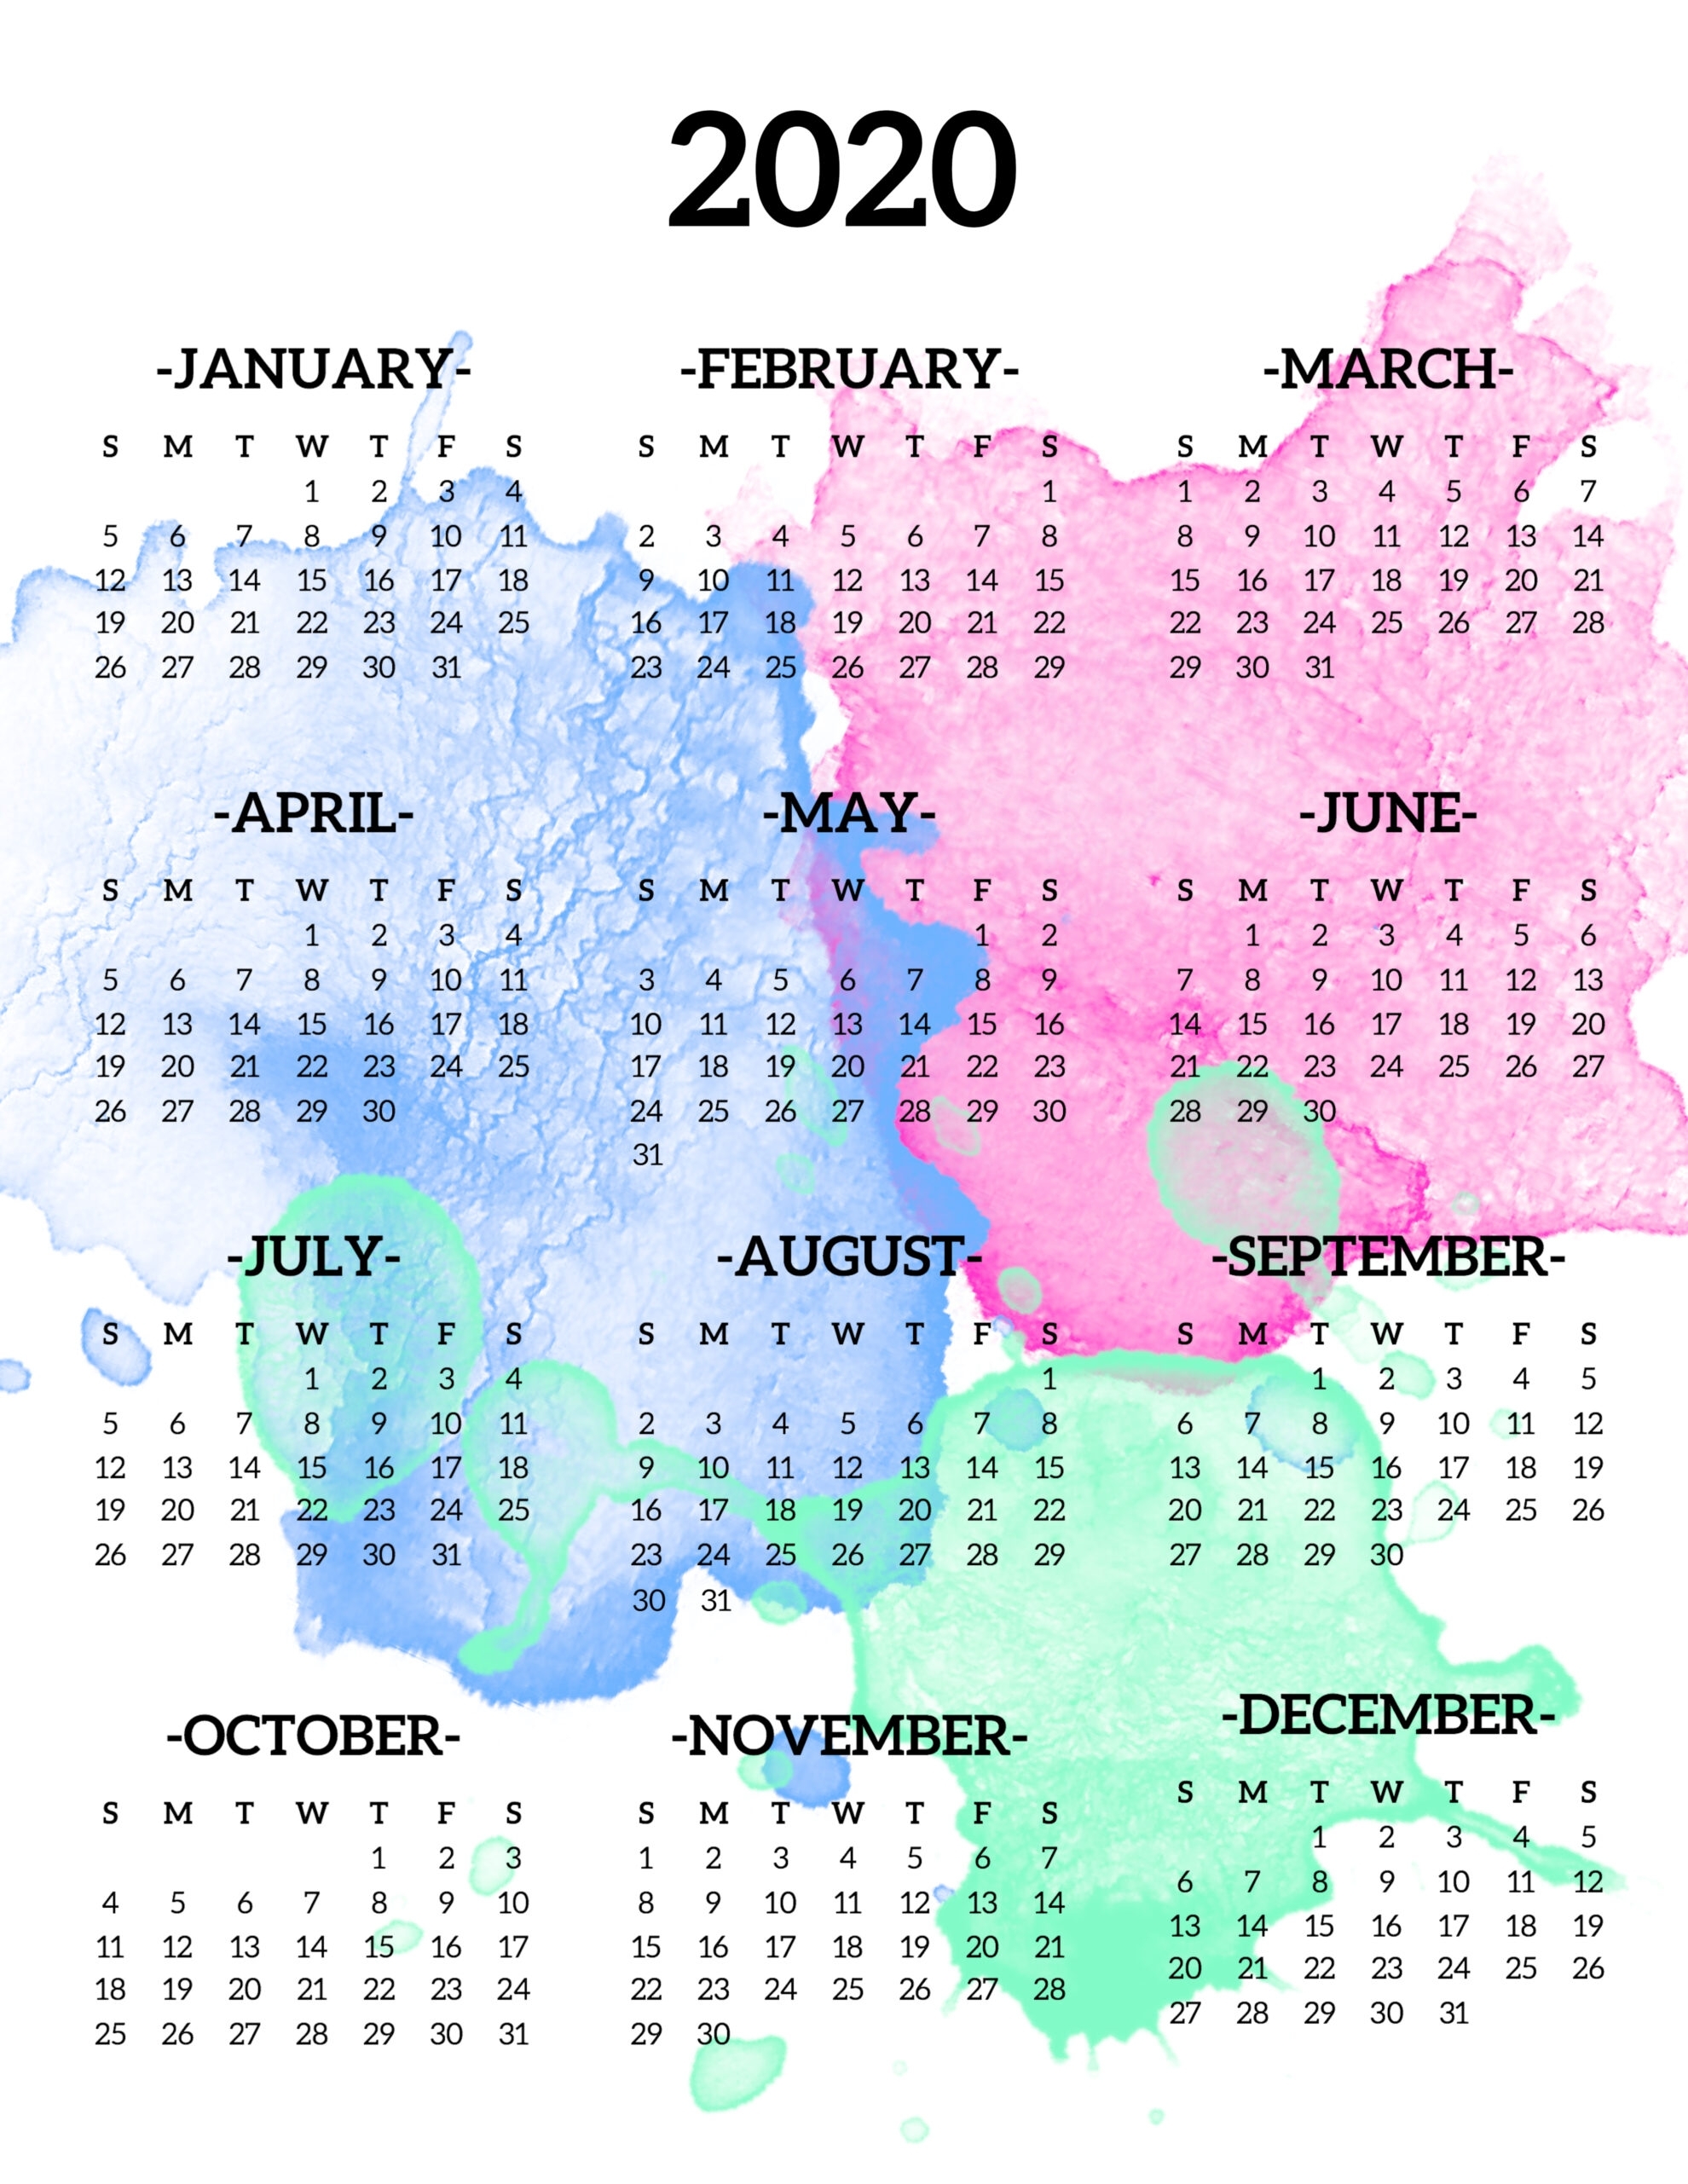 Calendar 2020 Printable One Page - Paper Trail Design for Year At A Glance 2020